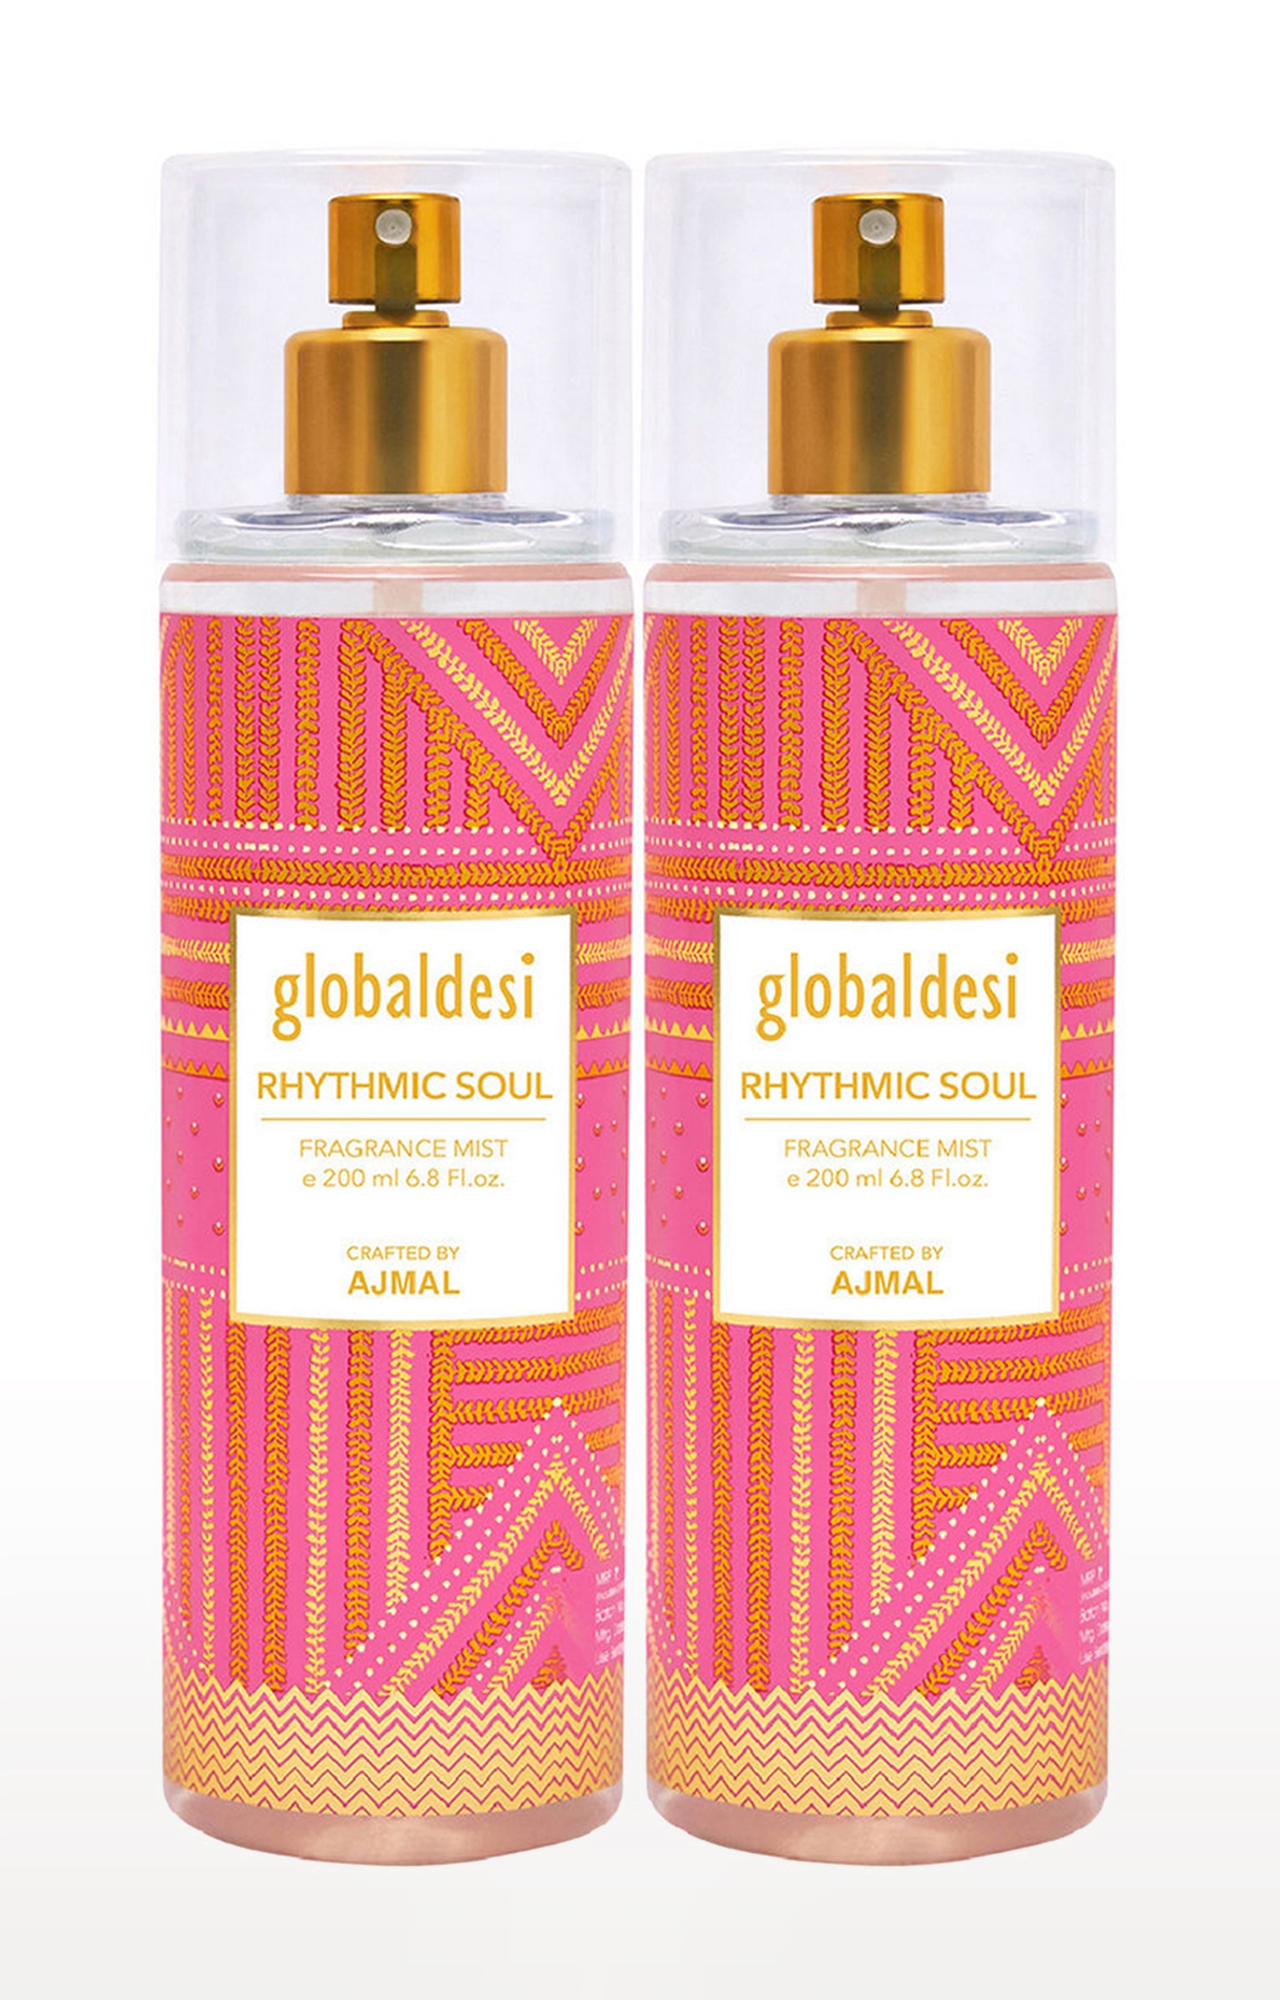 Global Desi Rhythmic Soul Pack of 2 Body Mist 200ML each Long Lasting Scent Spray Gift For Women Perfume Crafted by Ajmal FREE